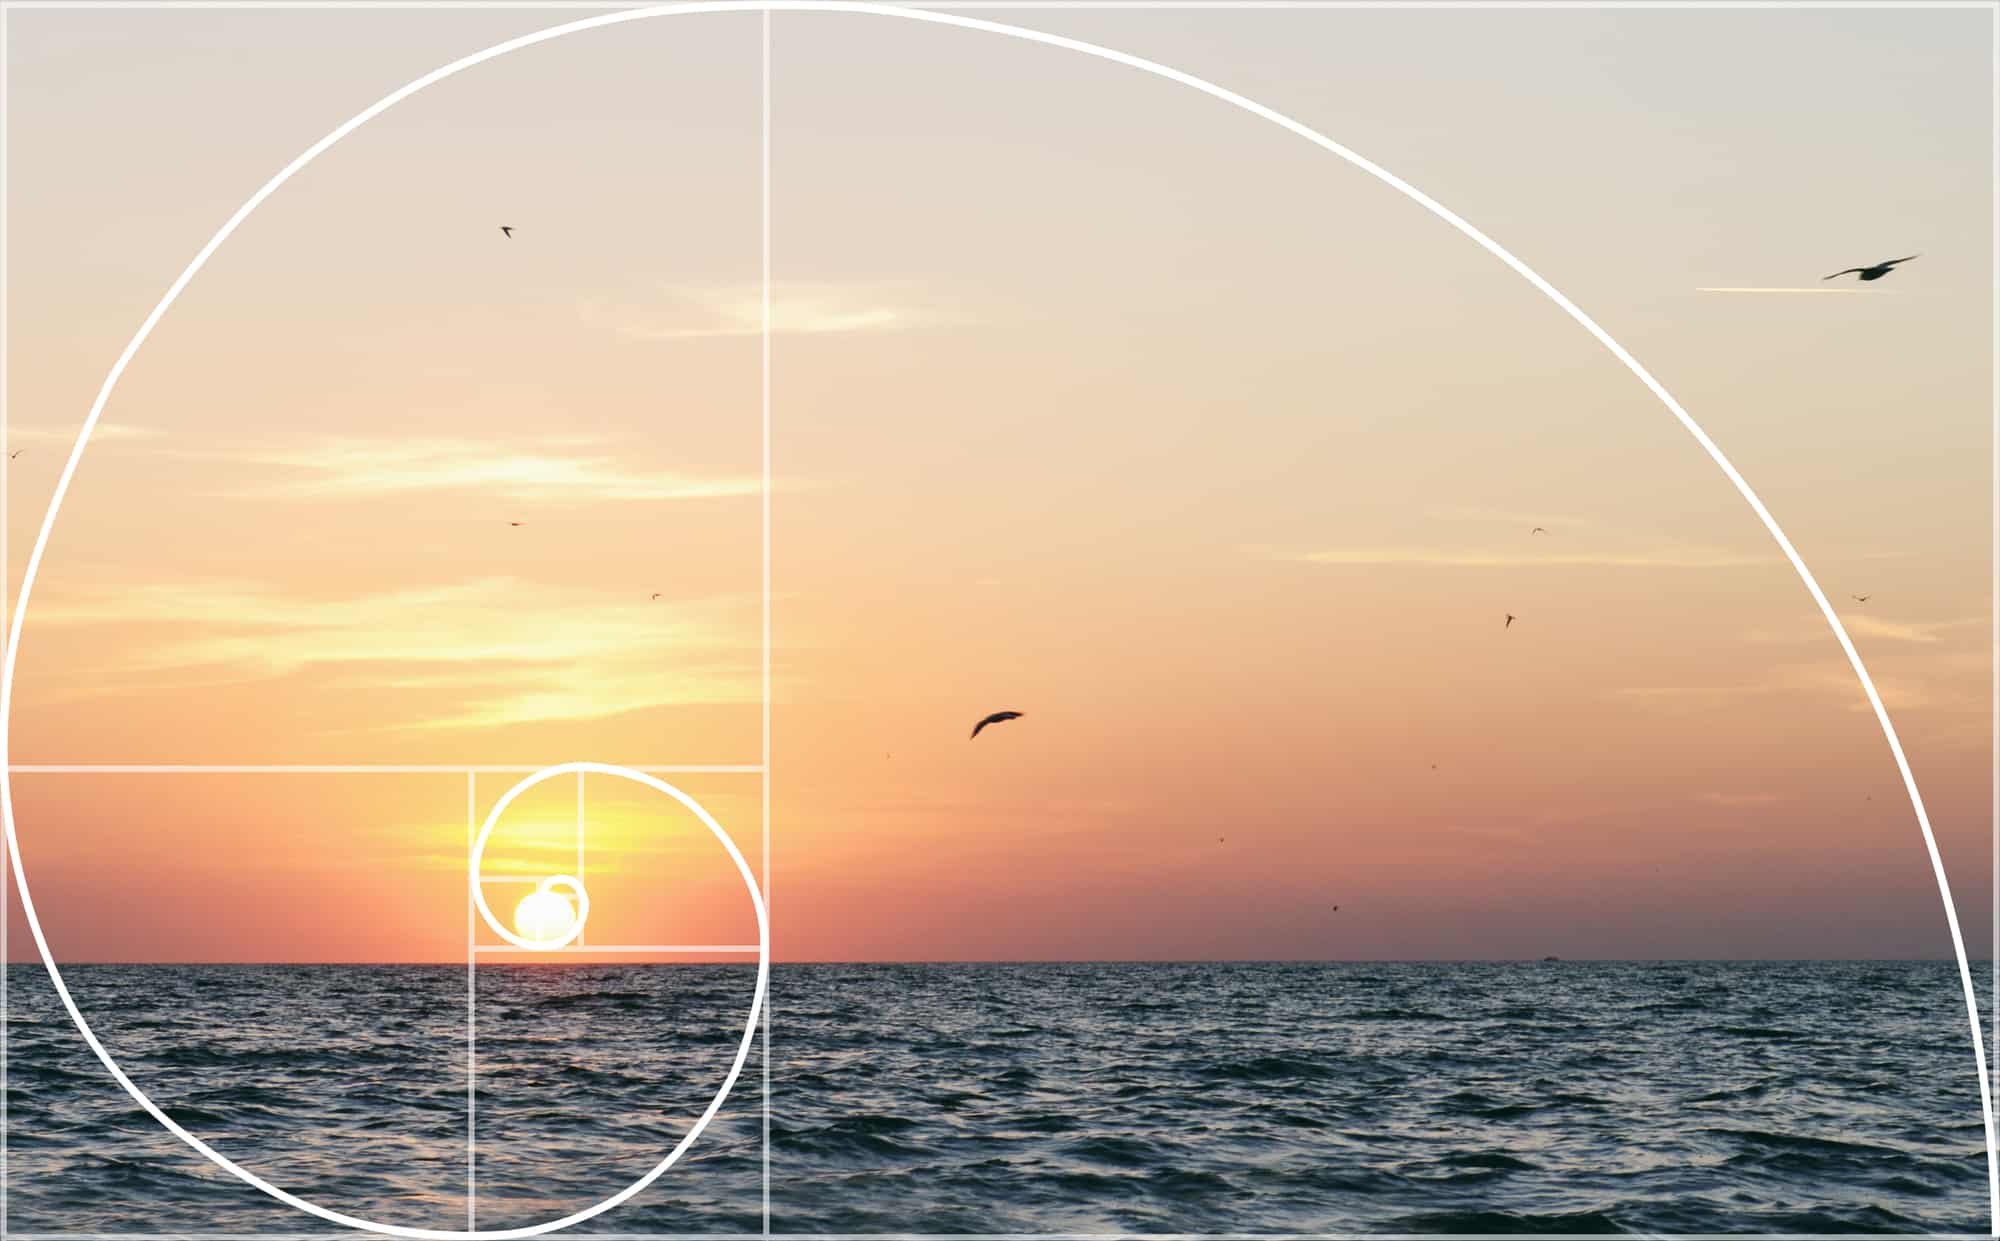 How to use the golden ratio in your photos